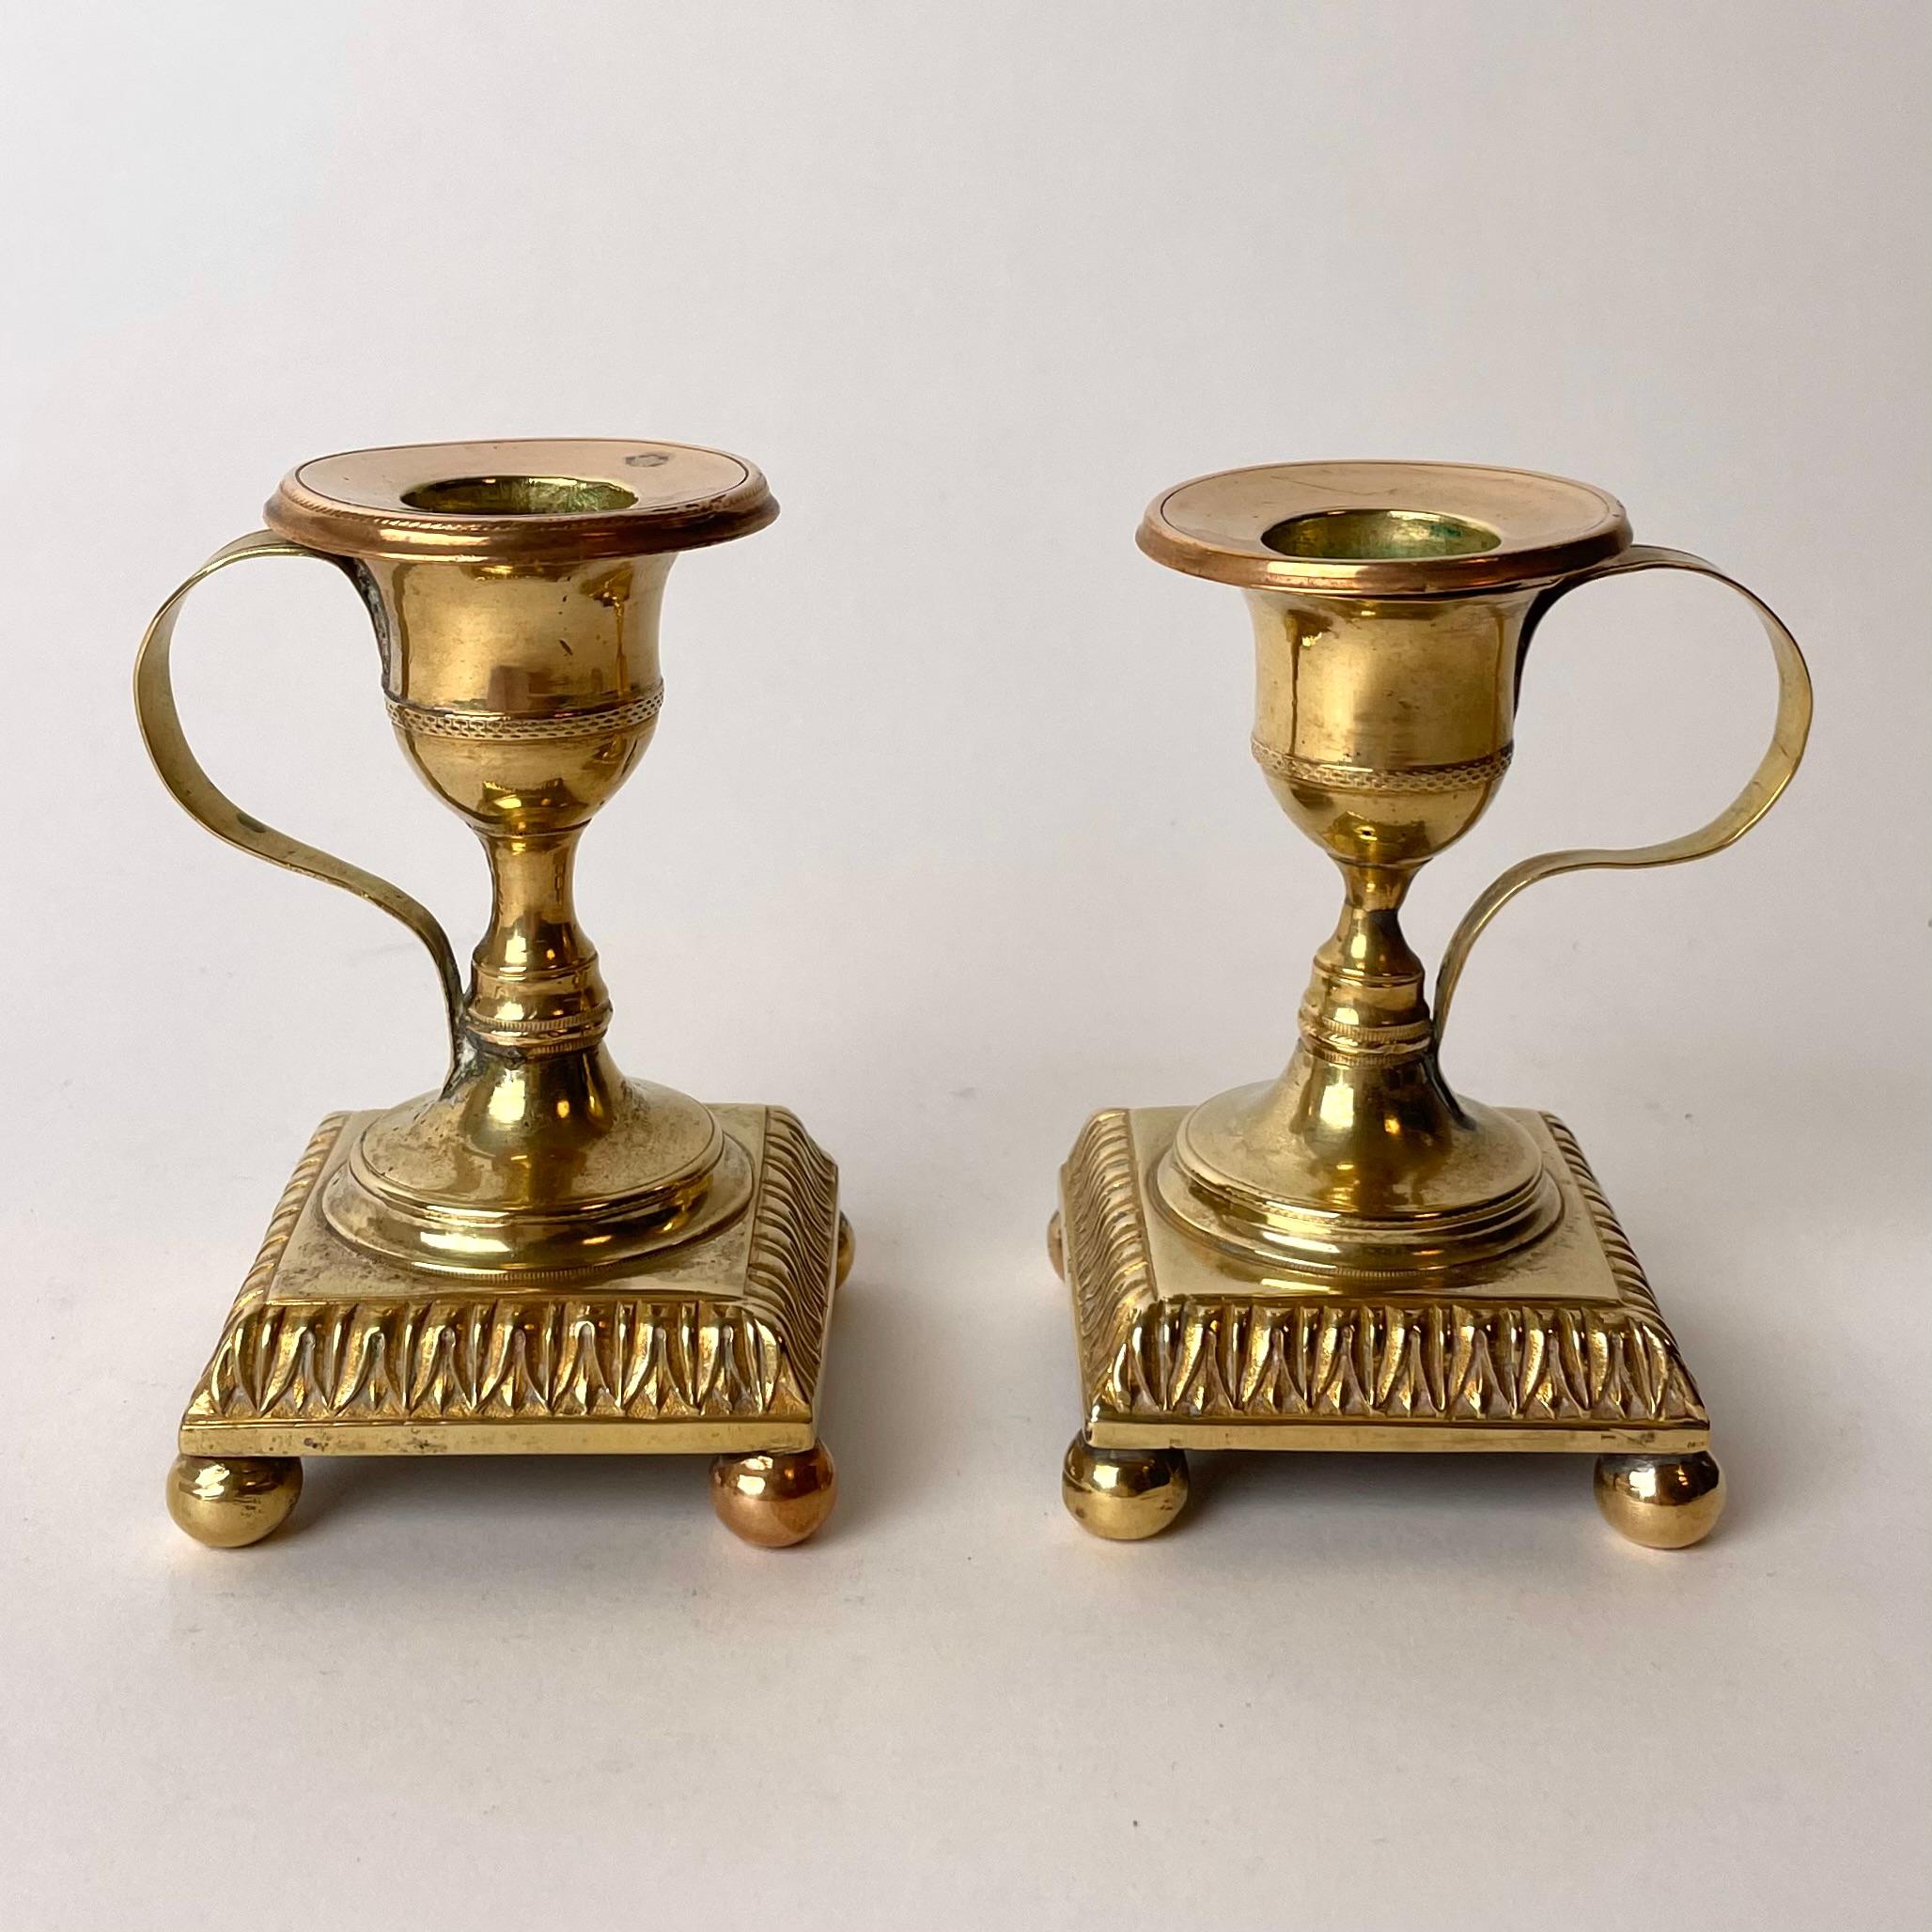 A small and charming pair of Gustavian night Candlesticks from the late 18th Century. Made in Sweden in gilted bronze during the 1780-1790s.

Wear consistent with age and use.